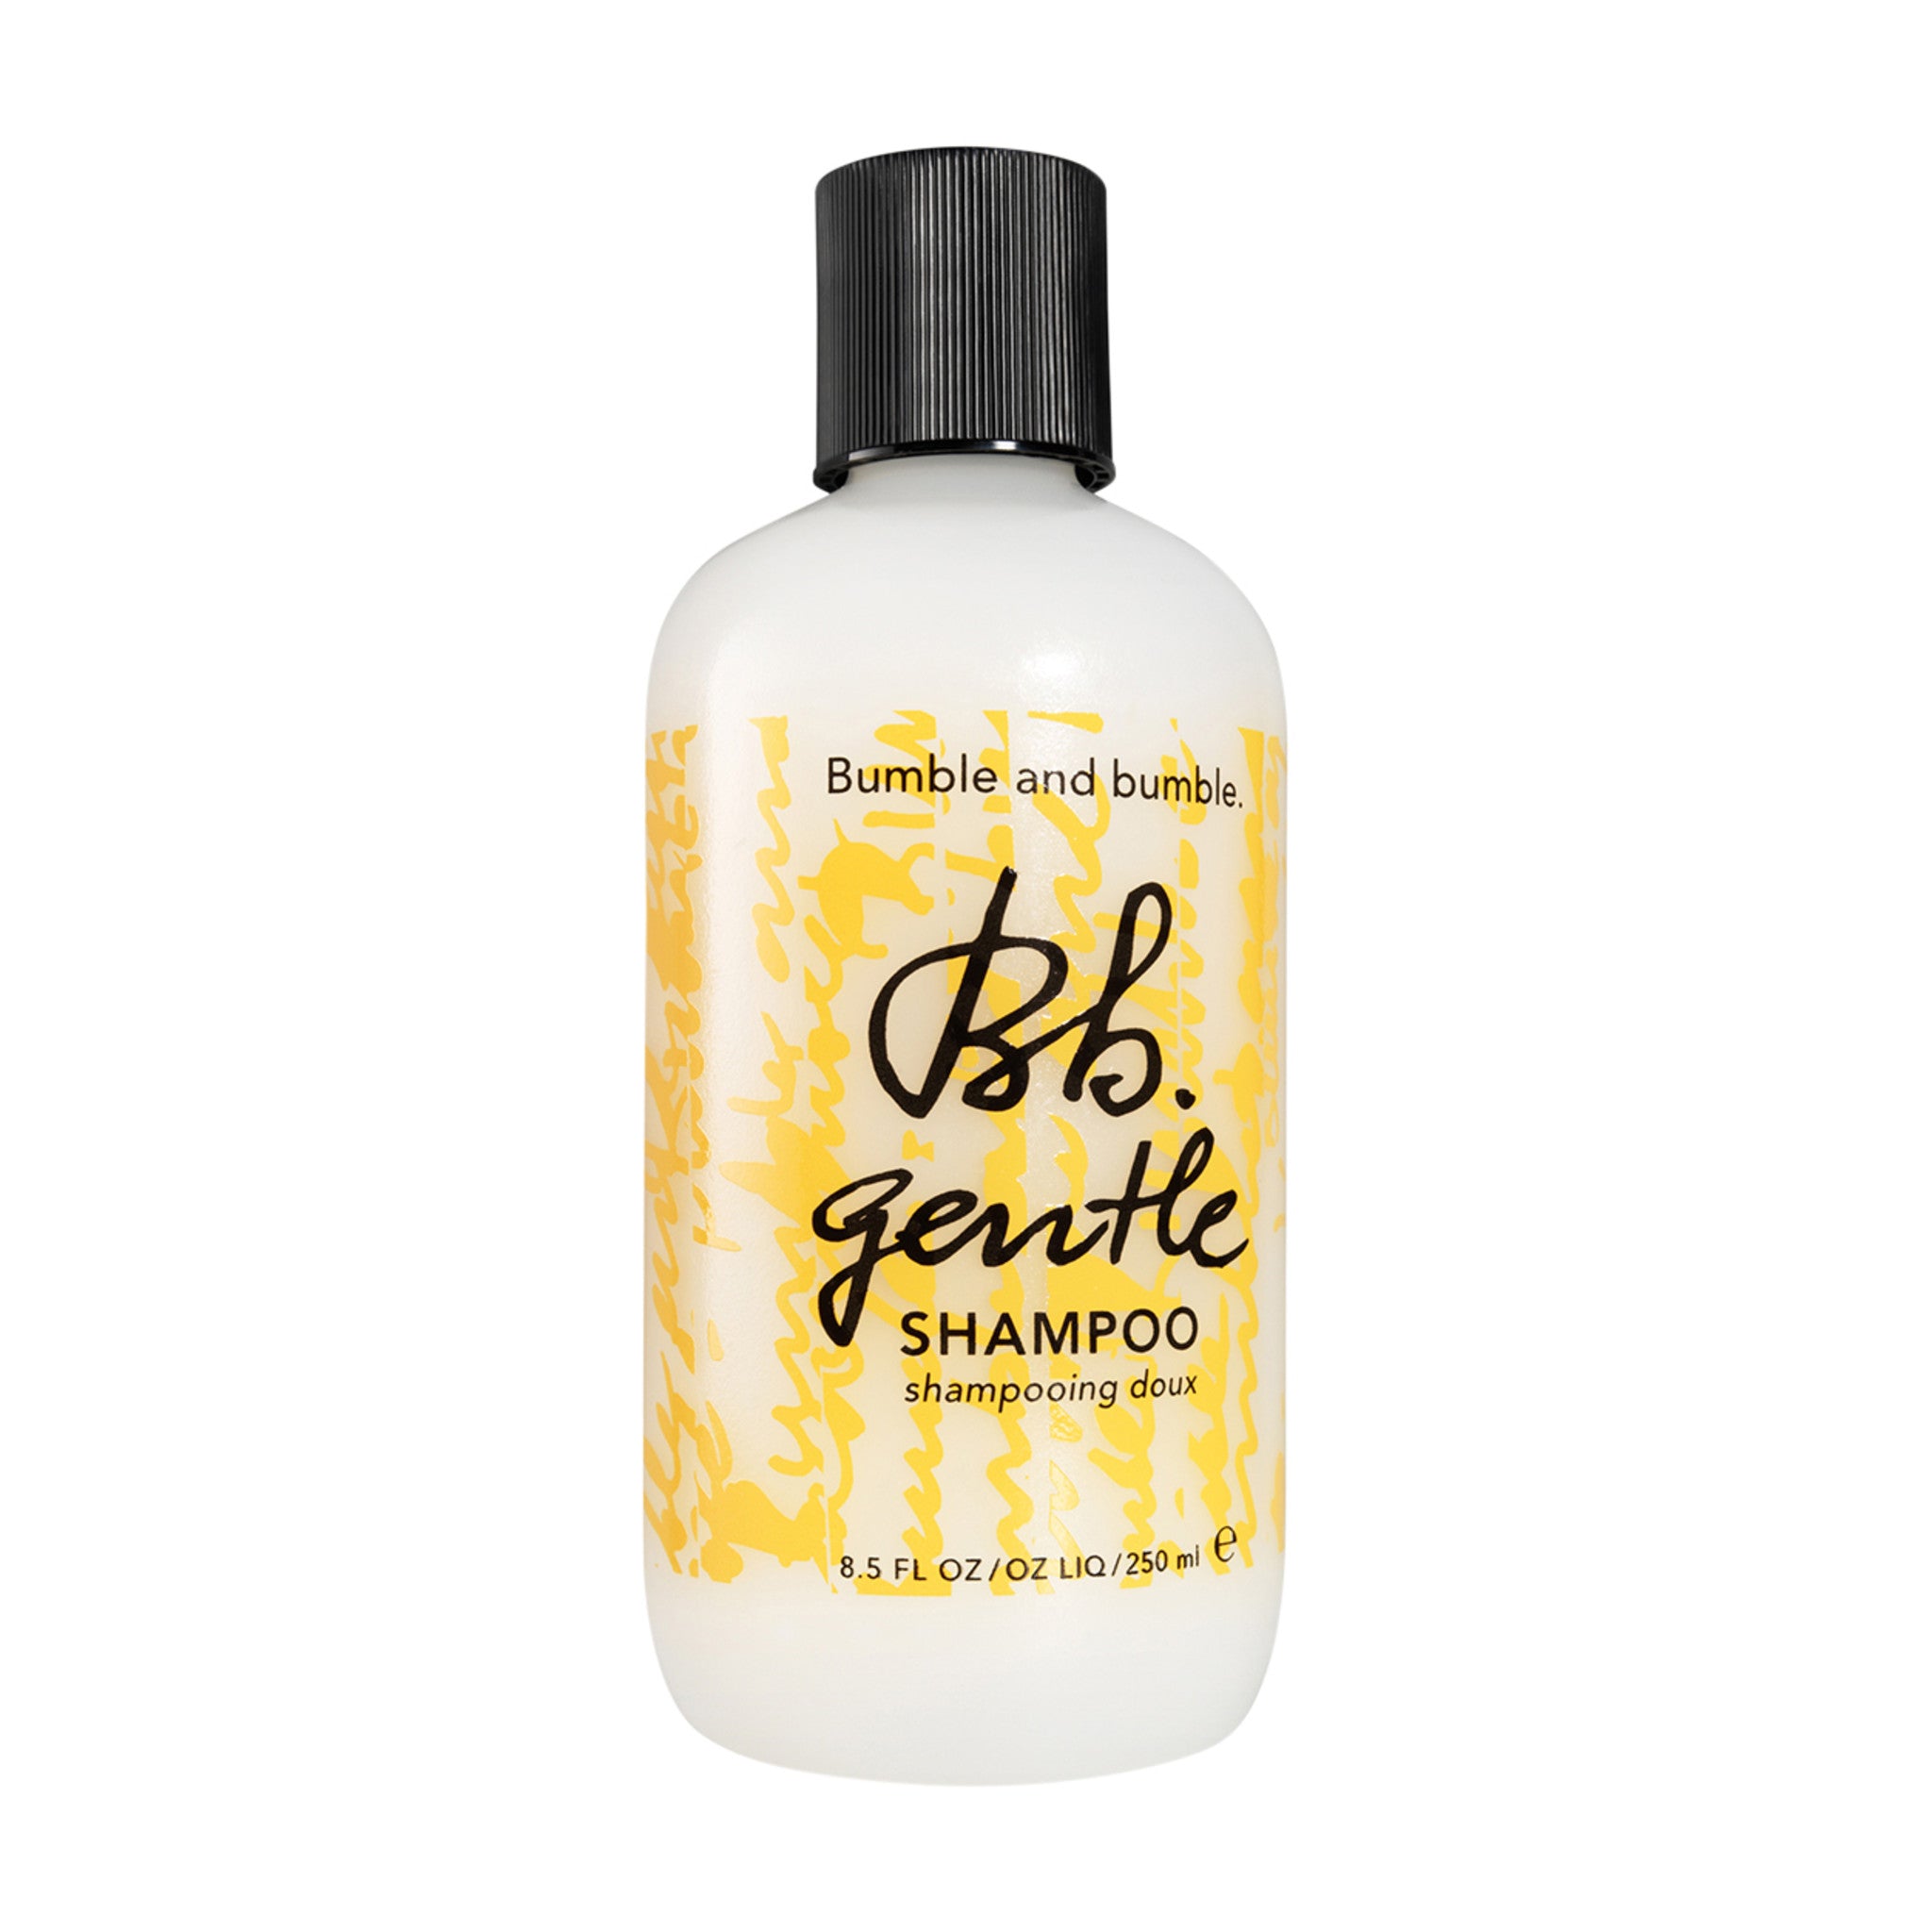 Bumble and Bumble Gentle Shampoo Size variant: 8.5 Oz. main image.